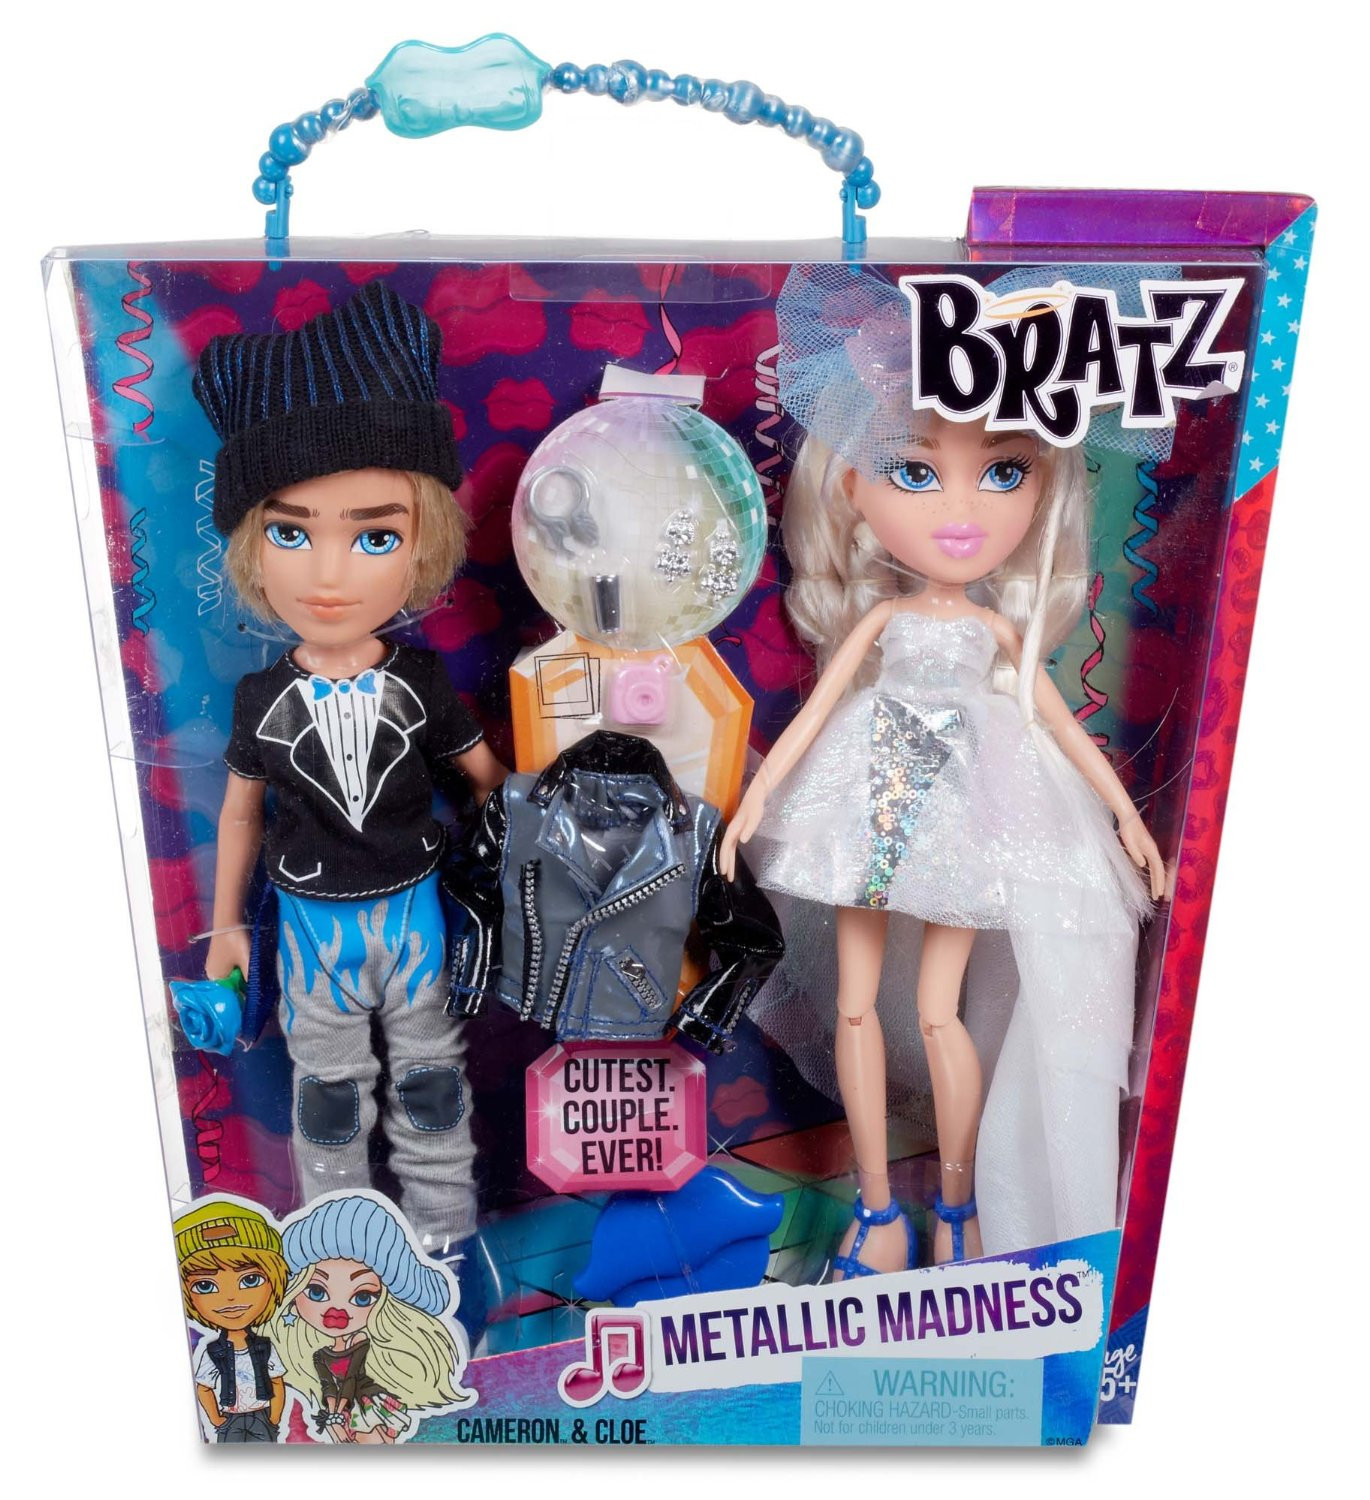 Bratz Metallic Madness 2-Pack, Style 2, Cameron/Cloe, Great Gift for Children Ages 5, 6, 7+ - image 1 of 4